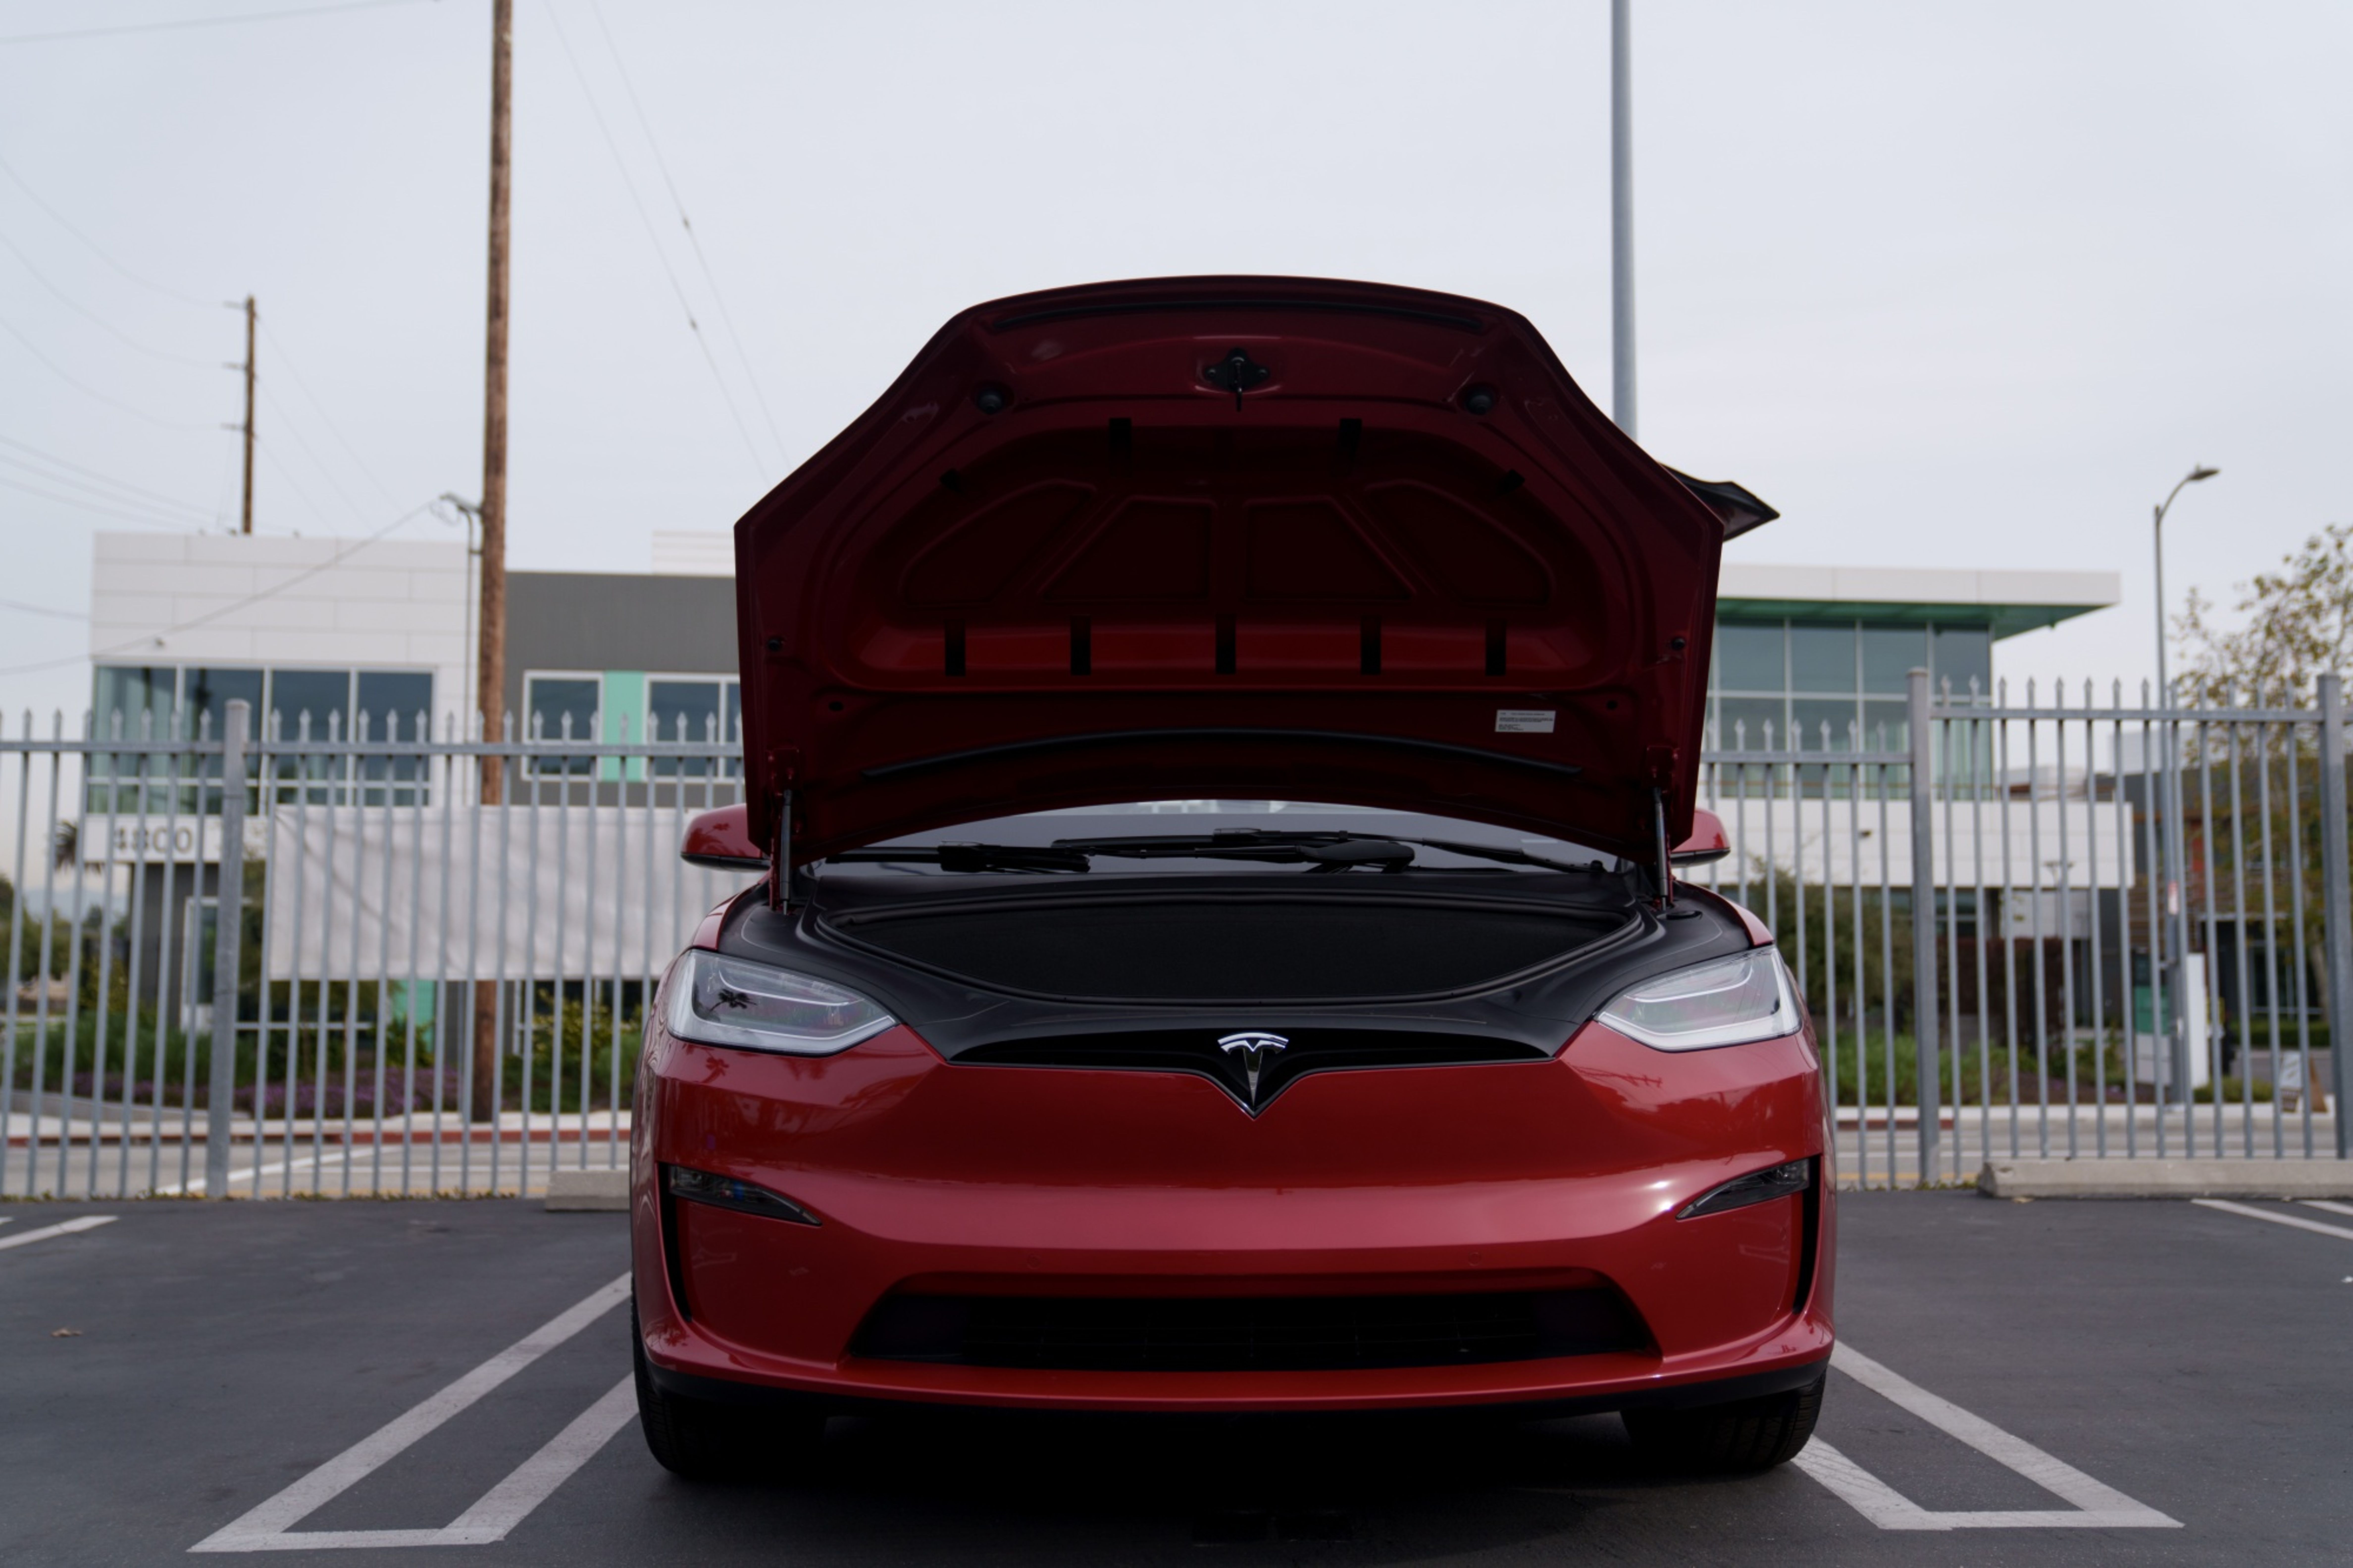 Why the Tesla price drop has rattled current owners